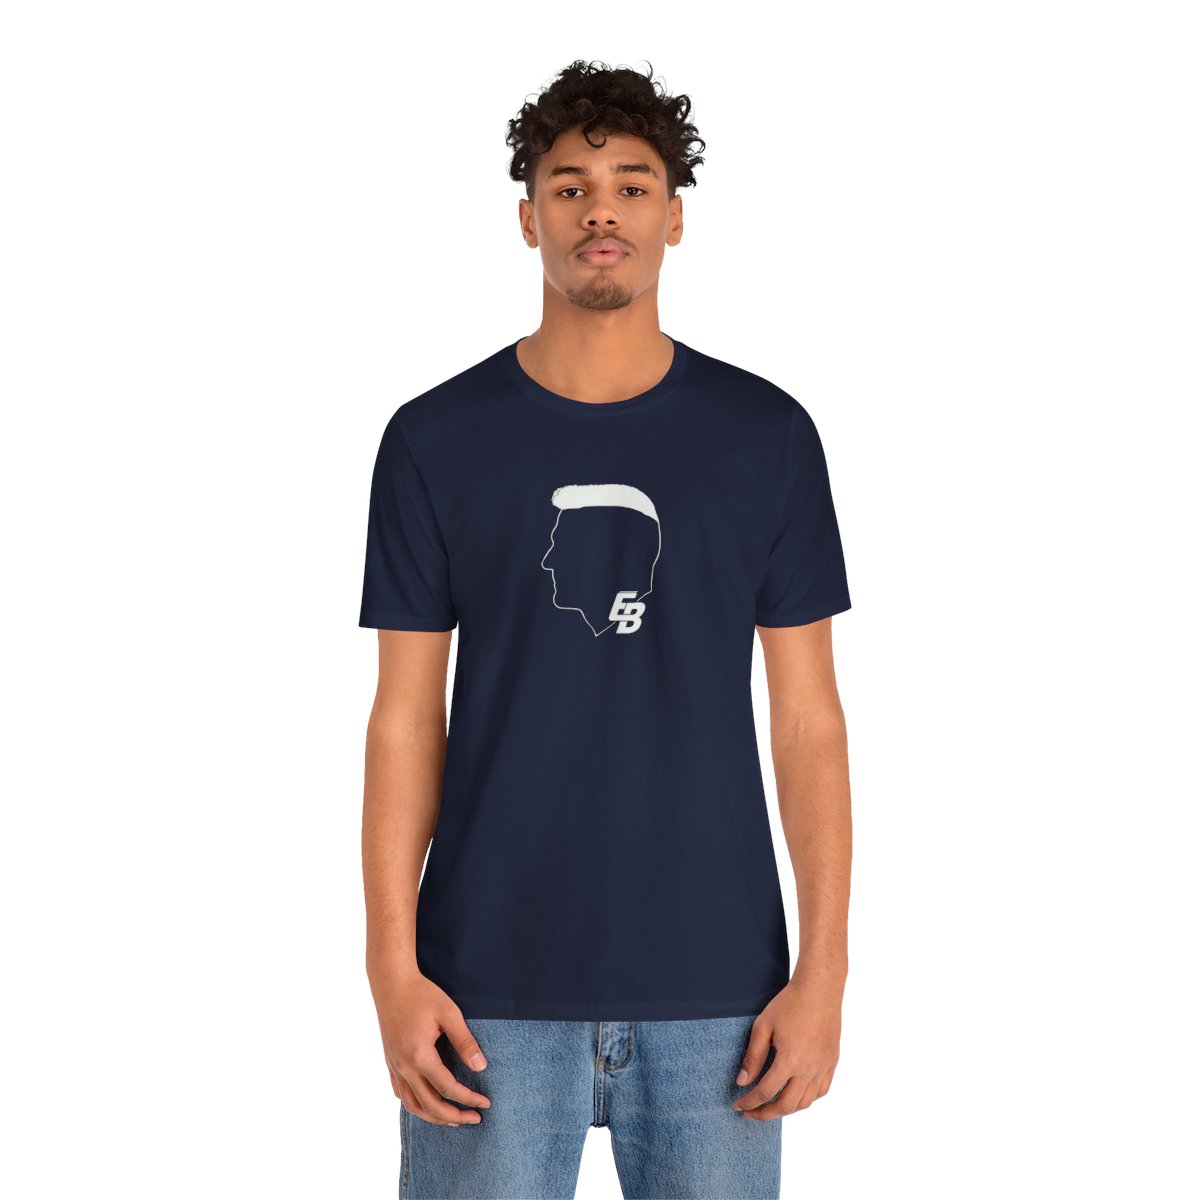 EB Silhouette Unisex Jersey S/S Tee product thumbnail image